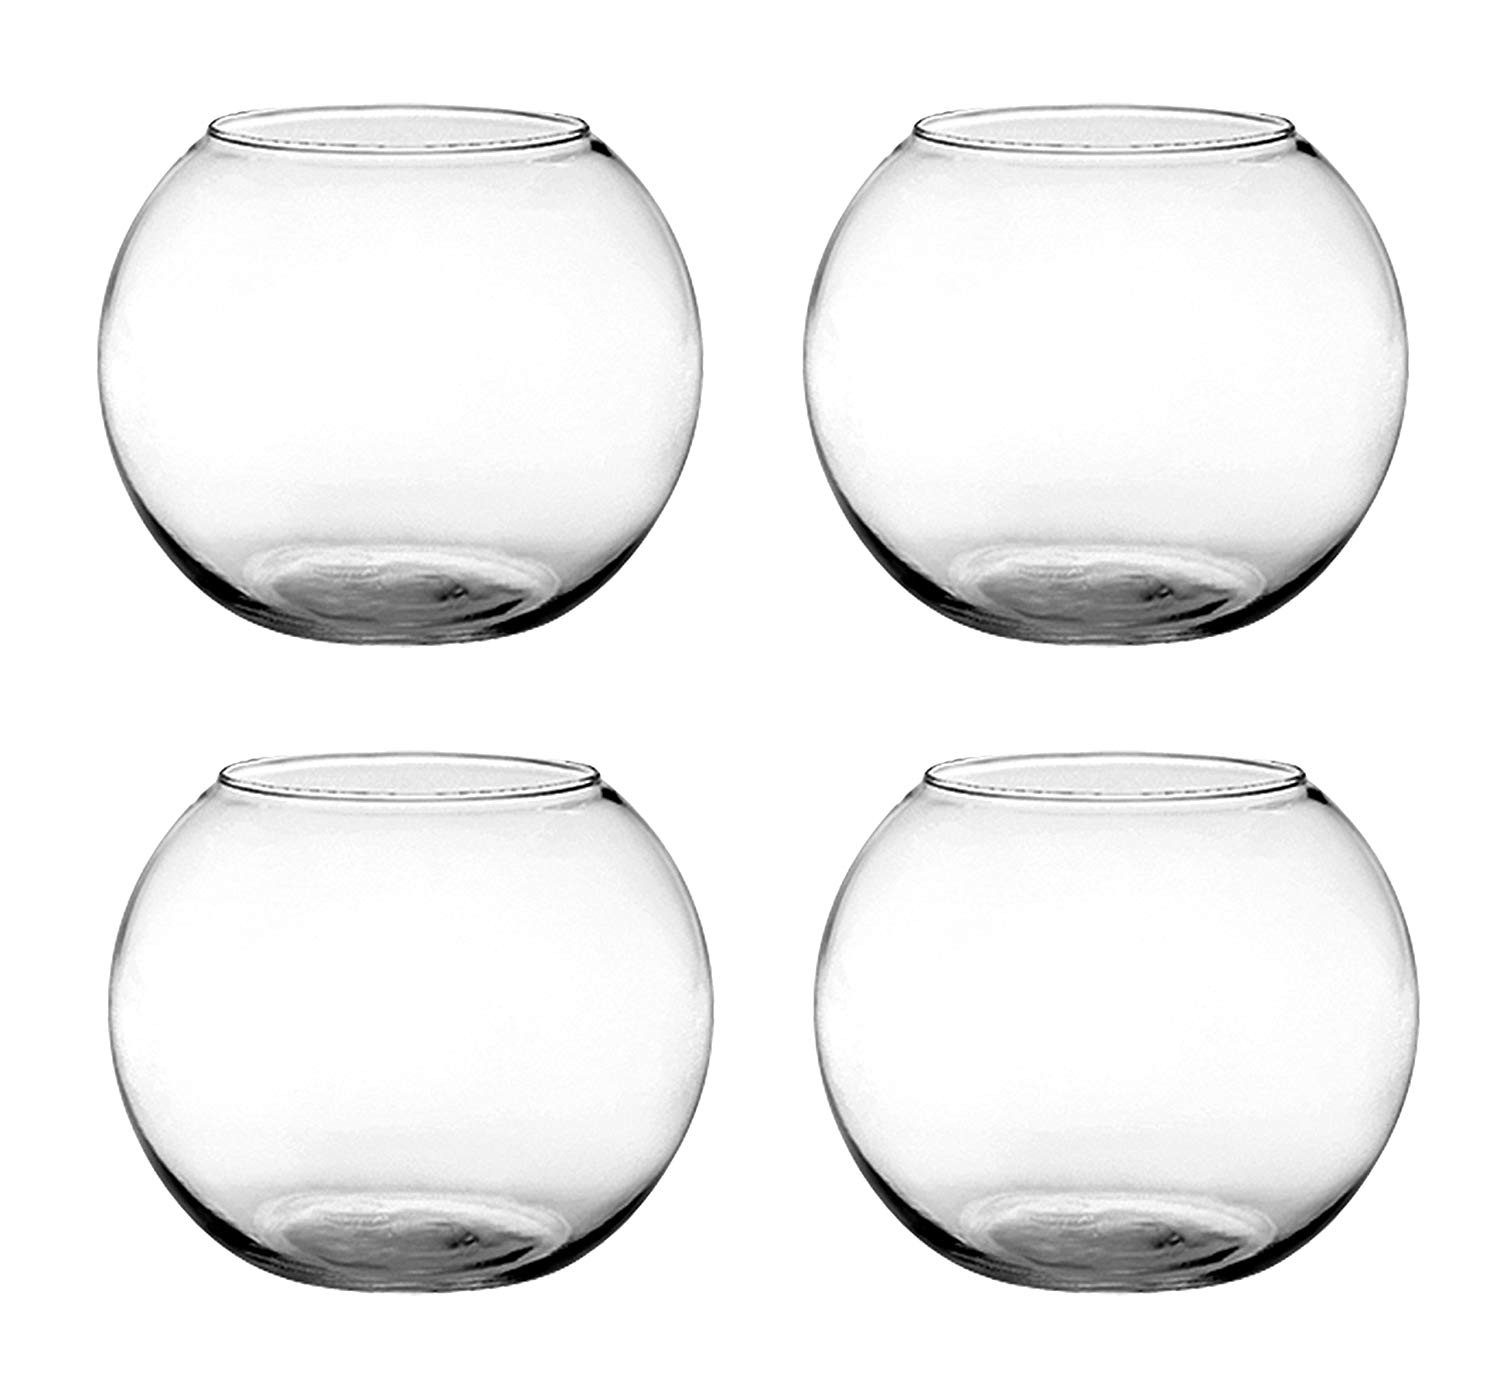 21 Famous Clear Cut Glass Vase 2024 free download clear cut glass vase of amazon com set of 4 syndicate sales 6 inches clear rose bowl regarding amazon com set of 4 syndicate sales 6 inches clear rose bowl bundled by maven gifts garden outd